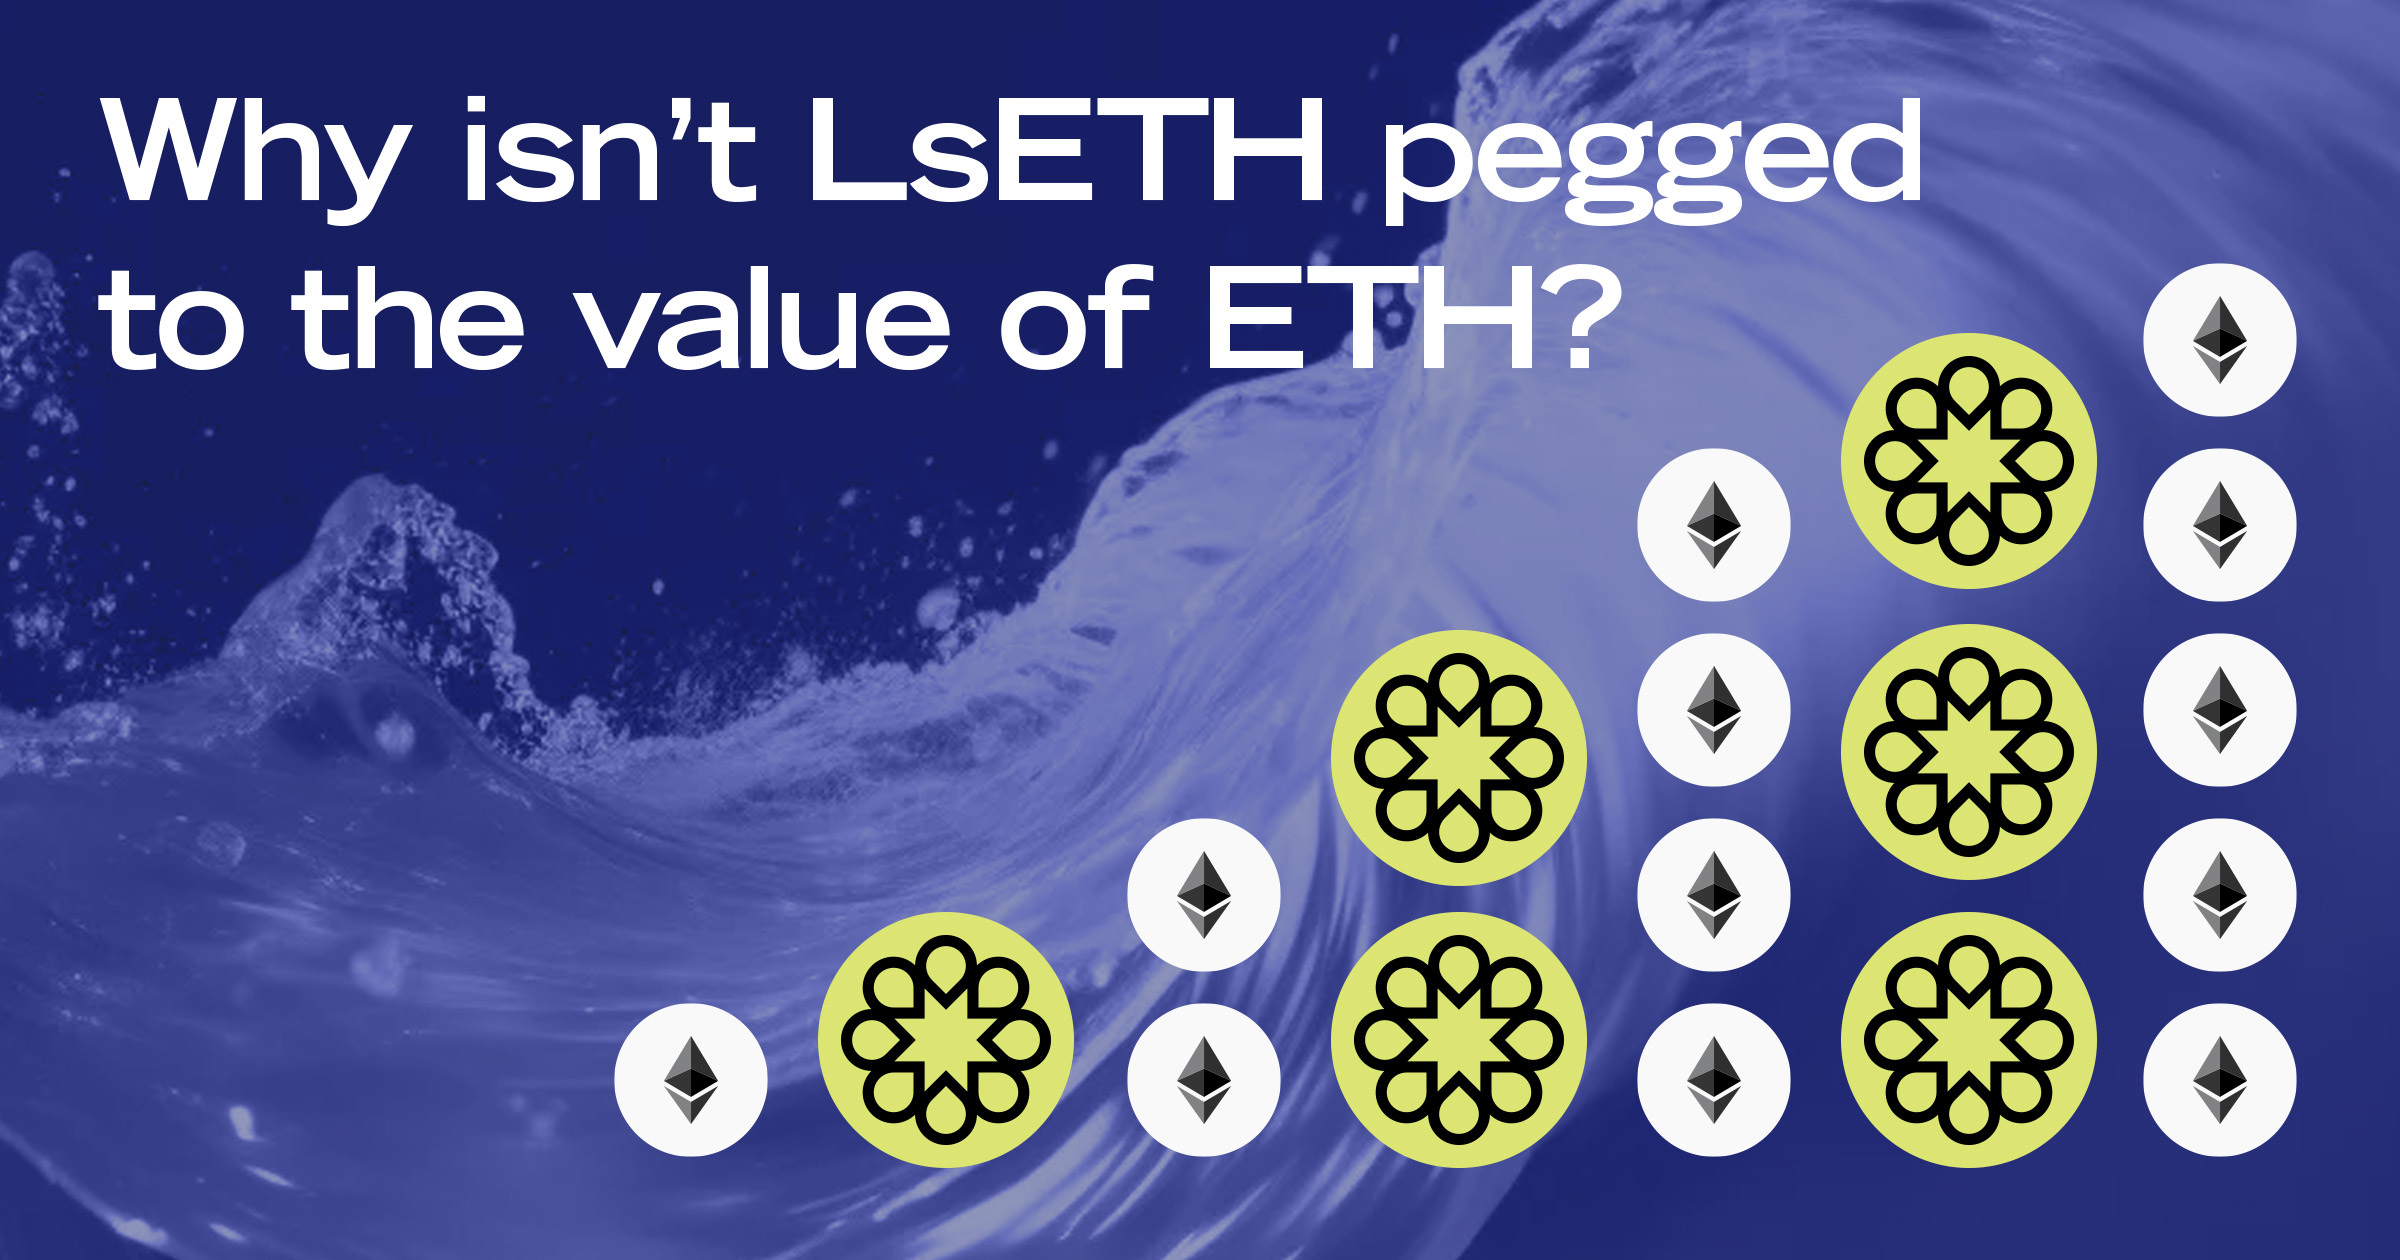 Why isn’t LsETH pegged to the value of ETH?